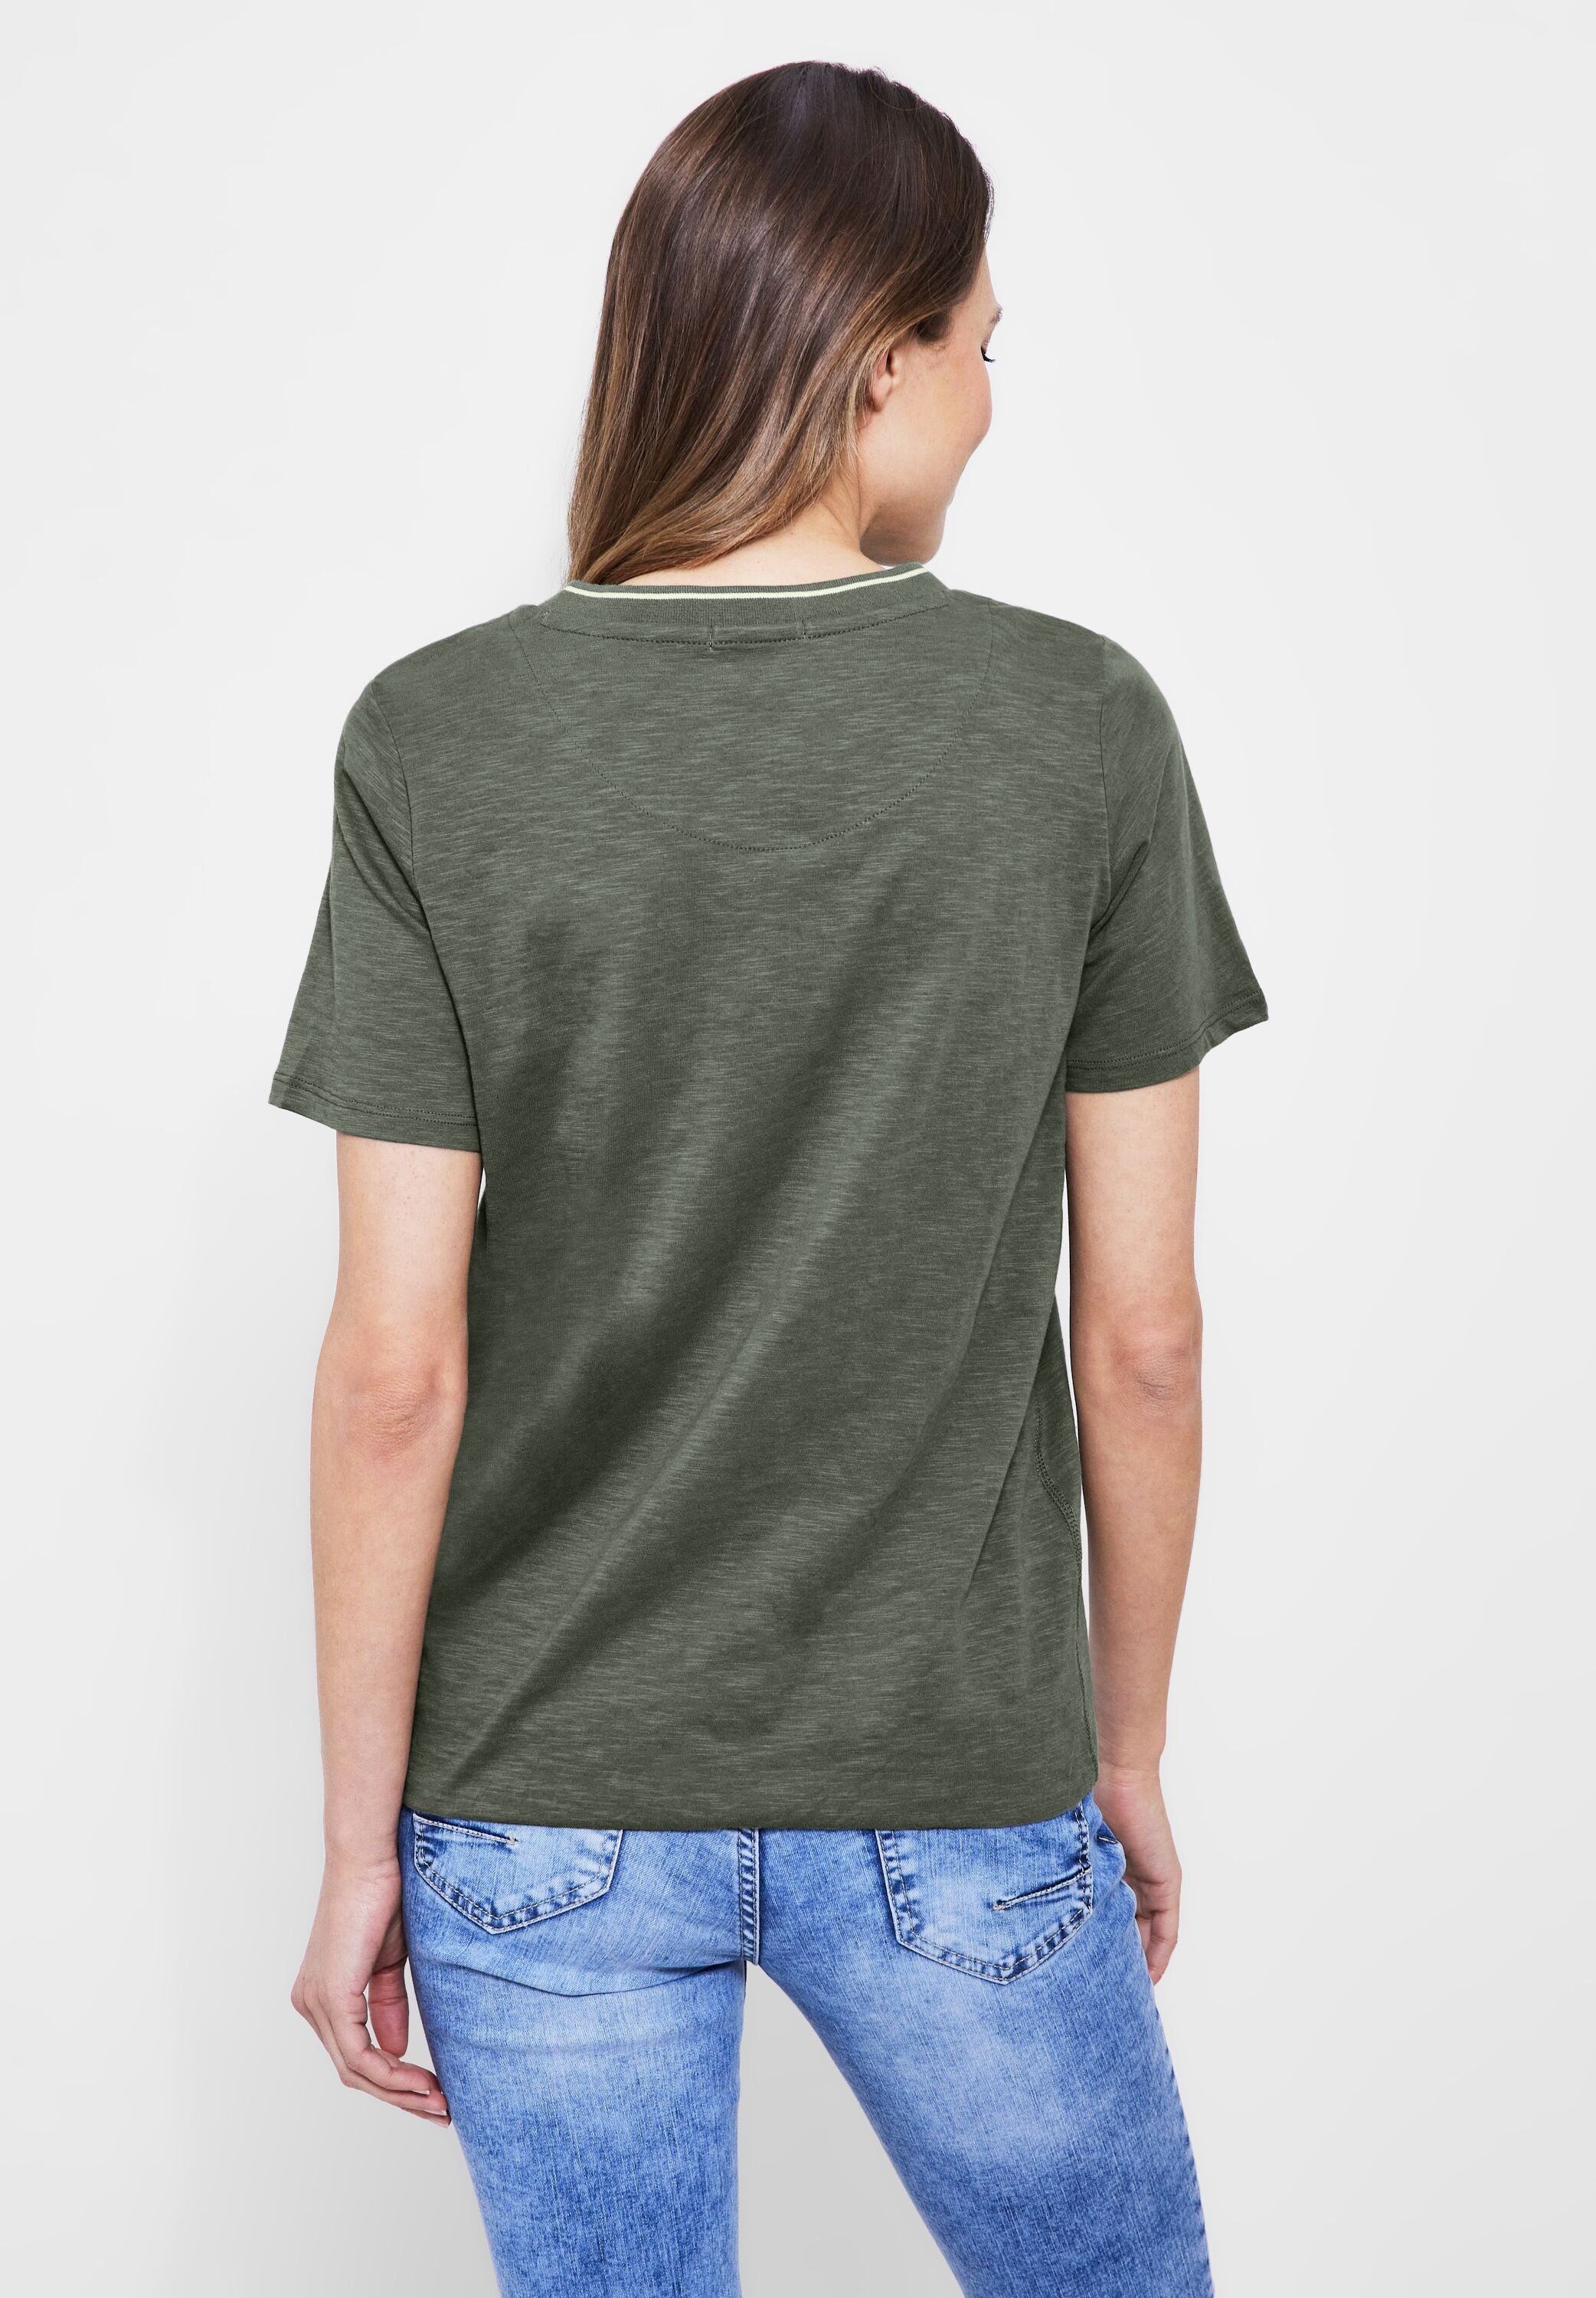 Cecil 3/4-Arm-Shirt in Unifarbe green desert olive